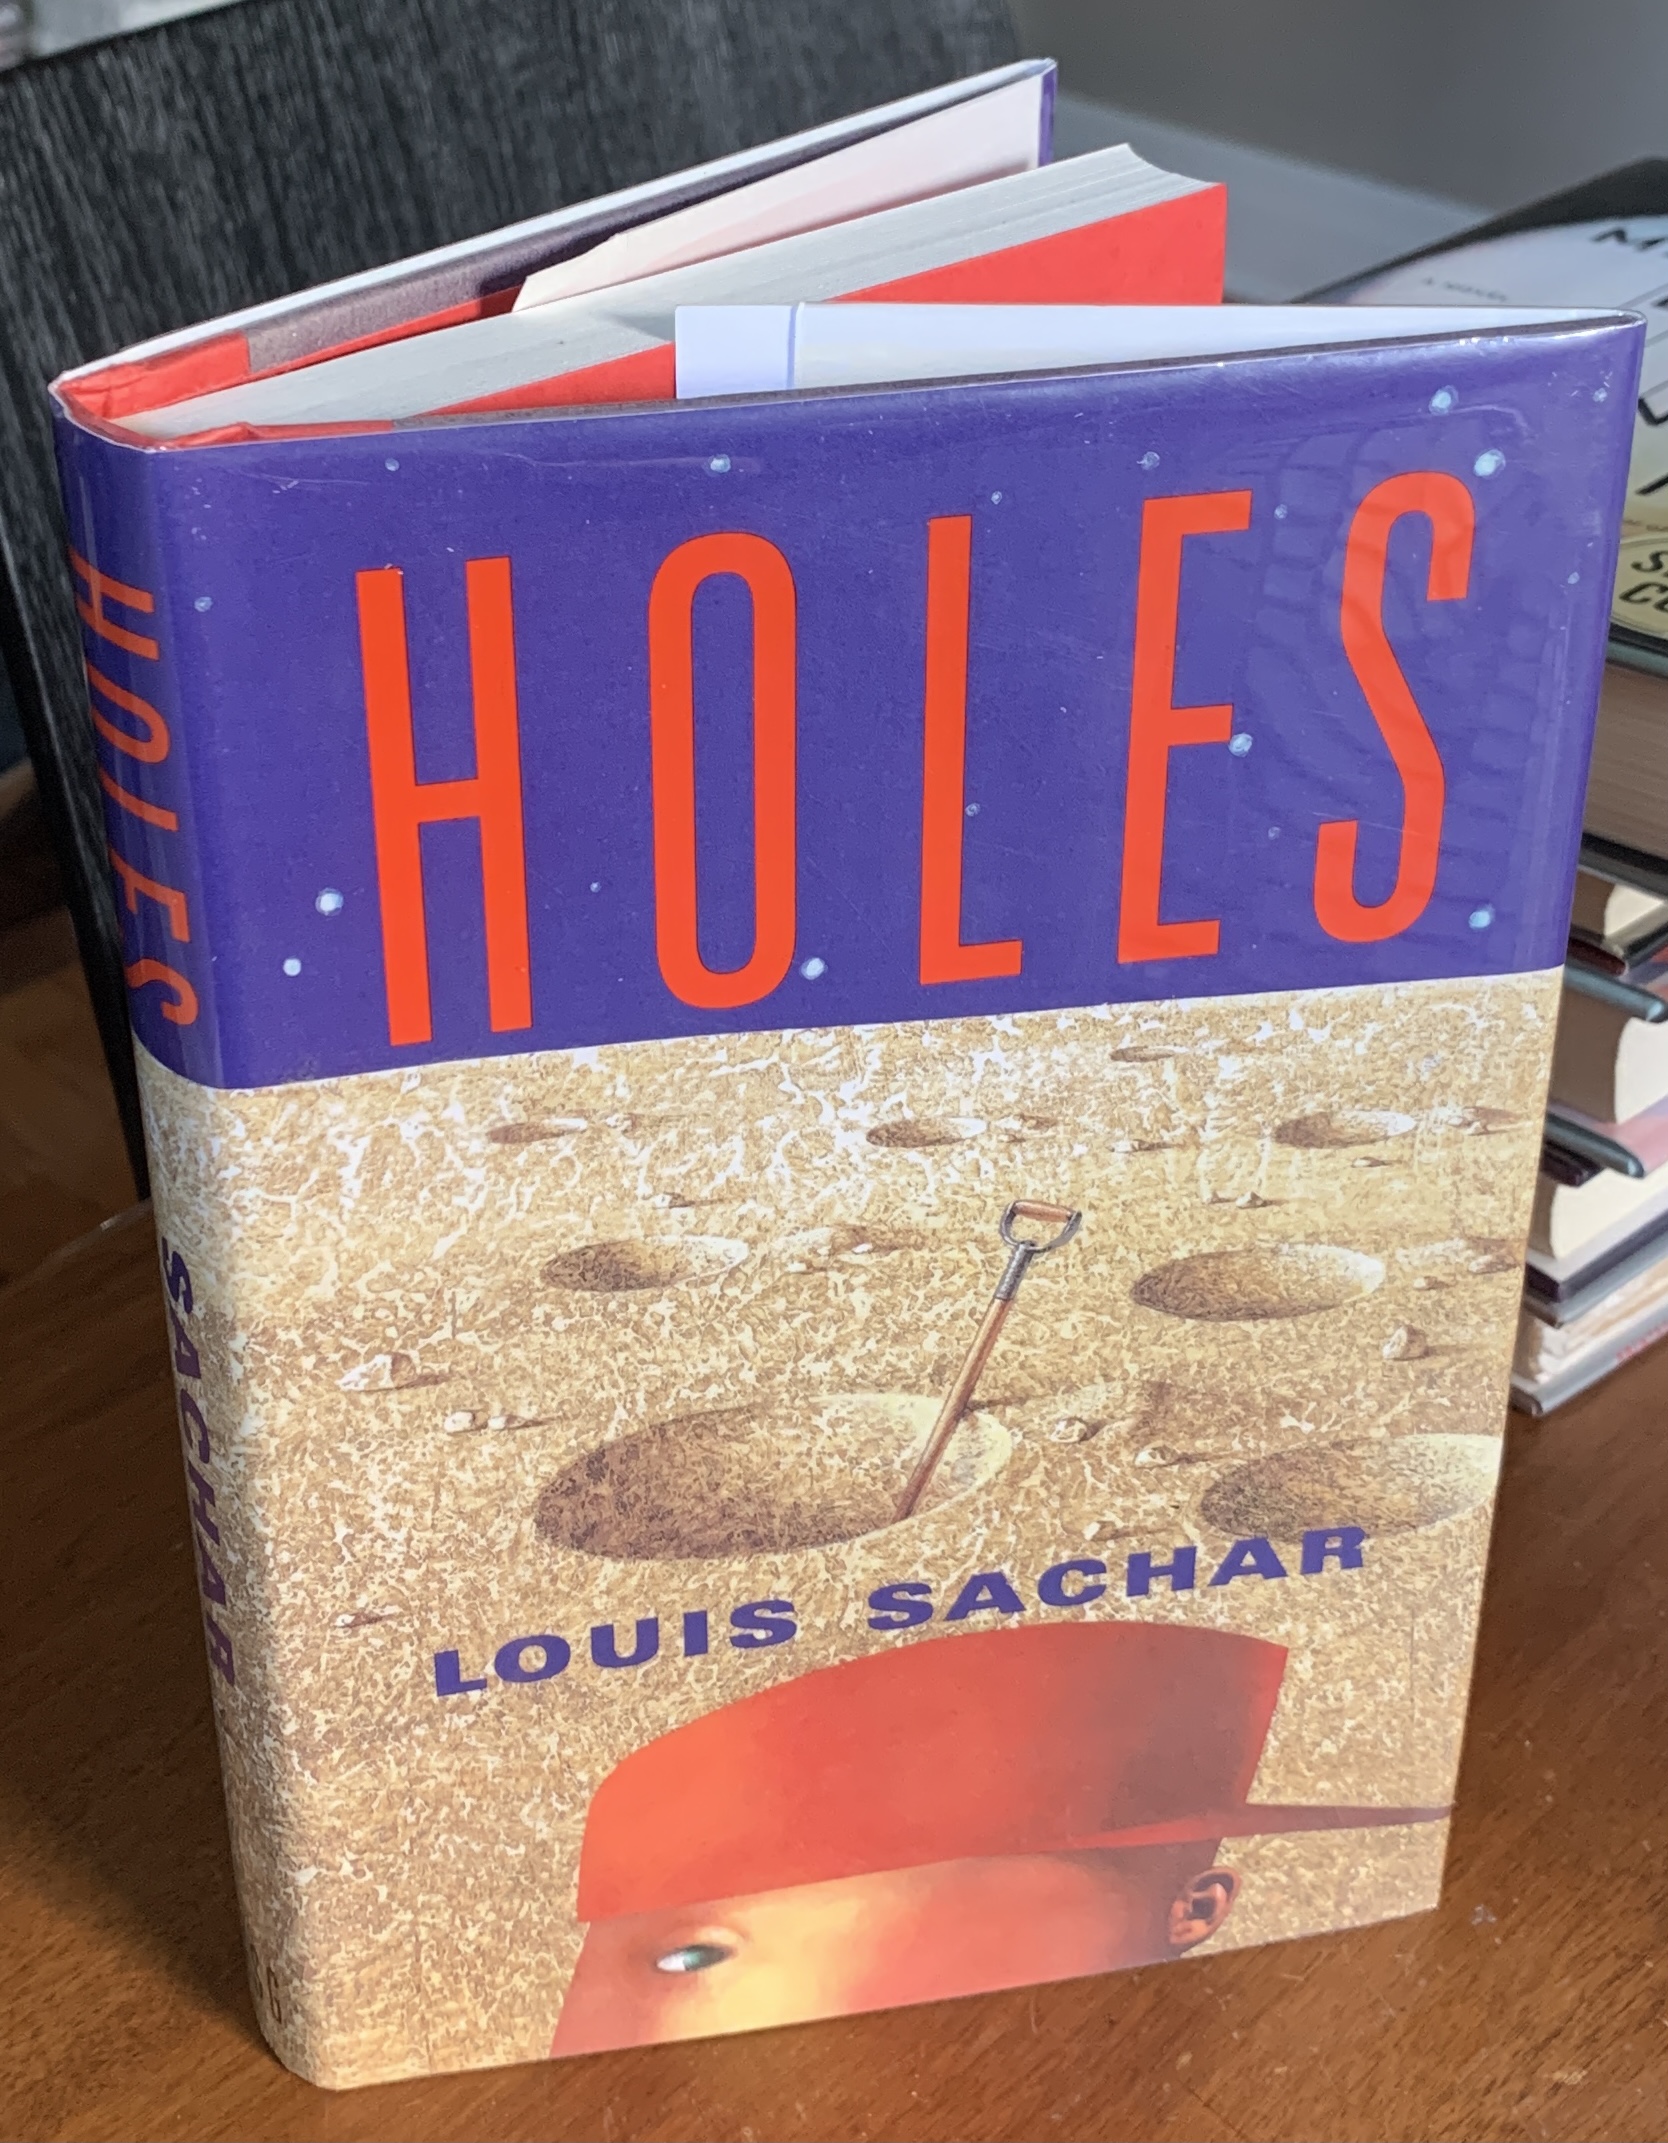 Holes **SIGNED FIRST PRINTING** by Sachar, Louis: As New Hardcover